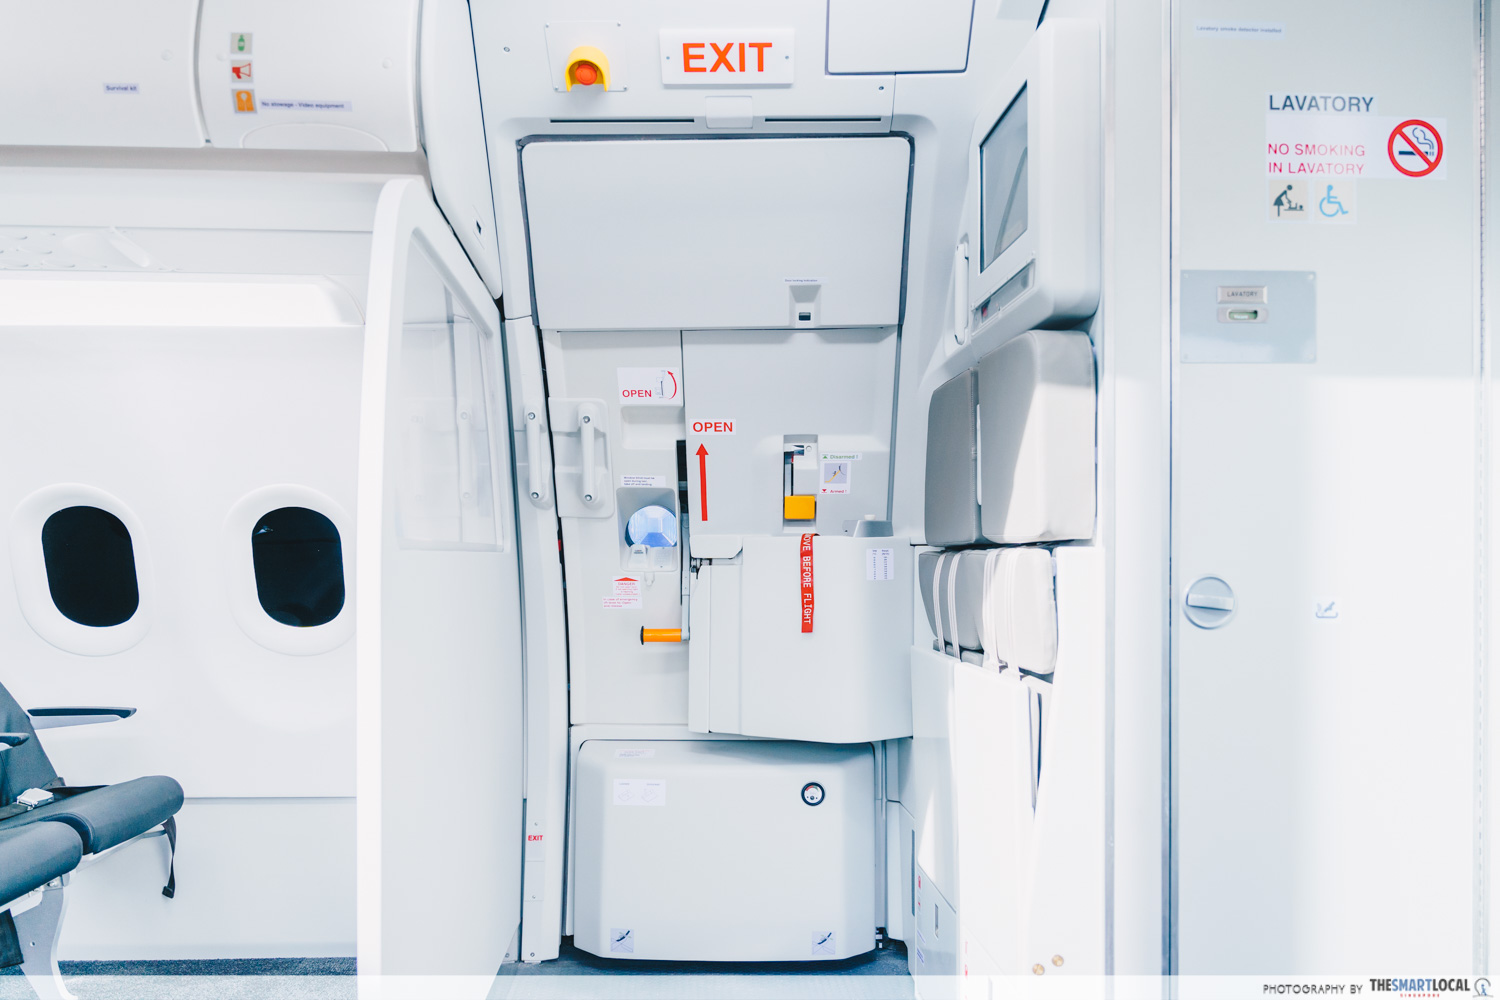 Airline myths - Aircraft emergency exit